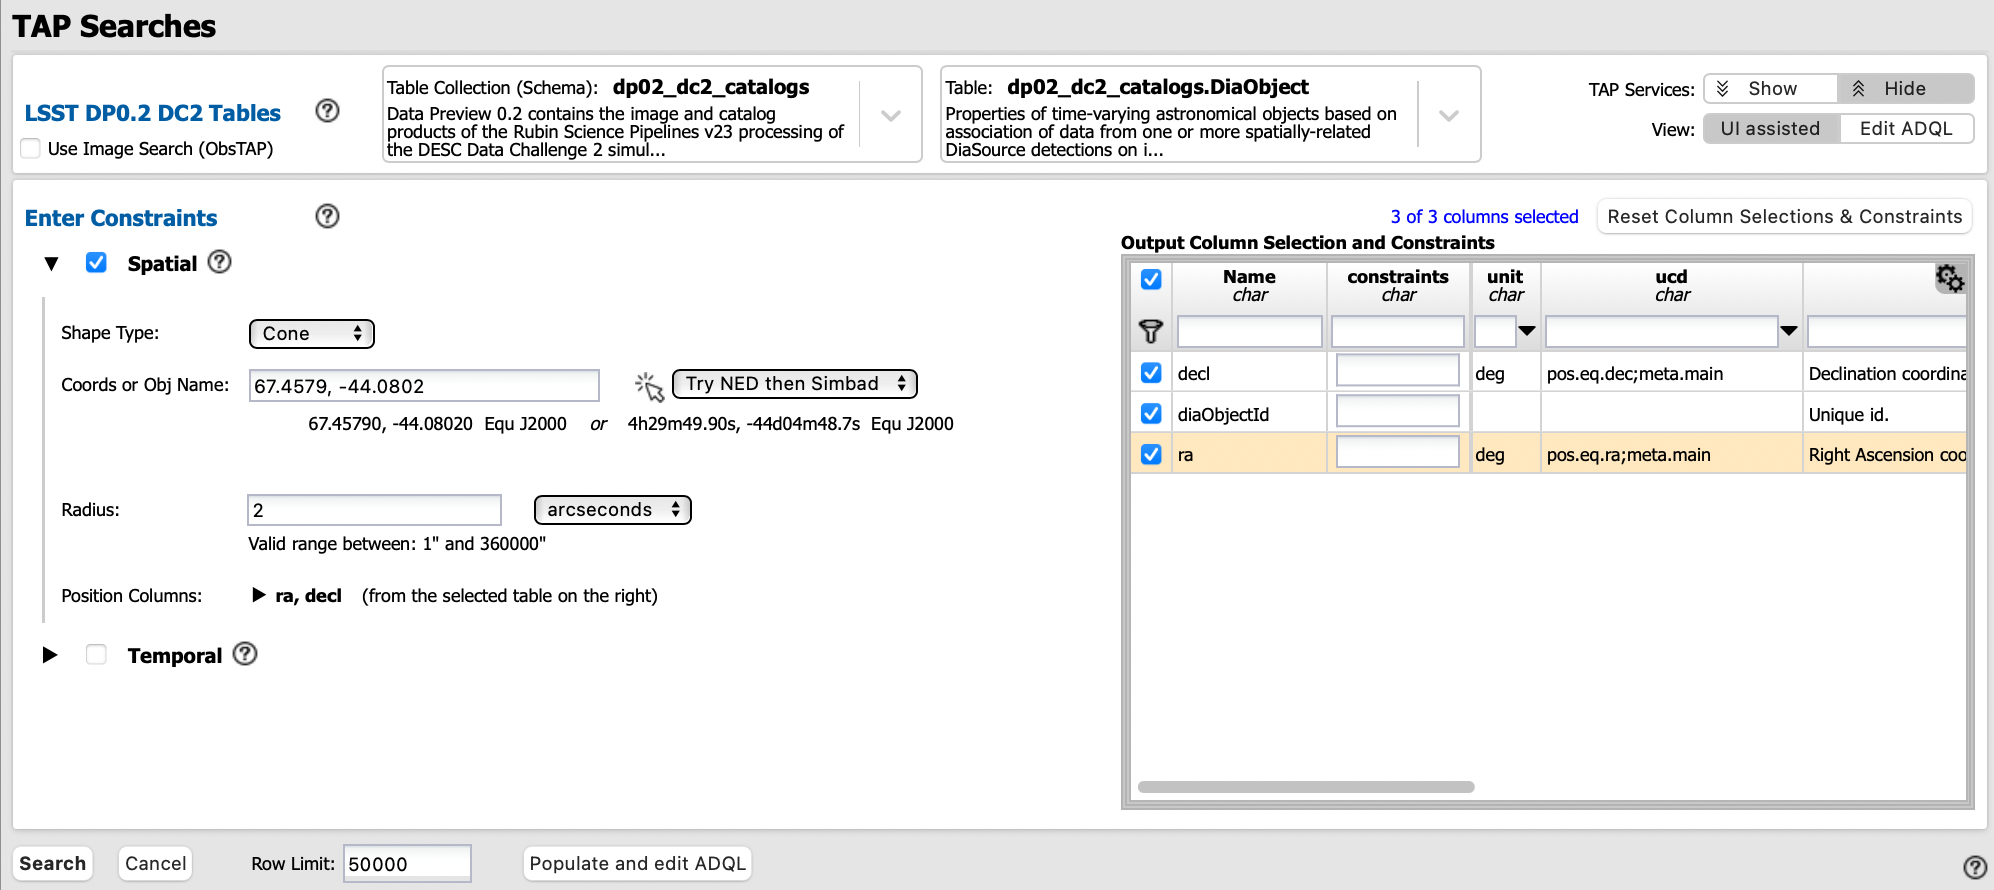 Screenshot of RSP portal interface DC2 difference image analysis object catalog query. Within this dialog box, the user can select the type of search, the image table collections, and various parameters to select information under investigation. (?)